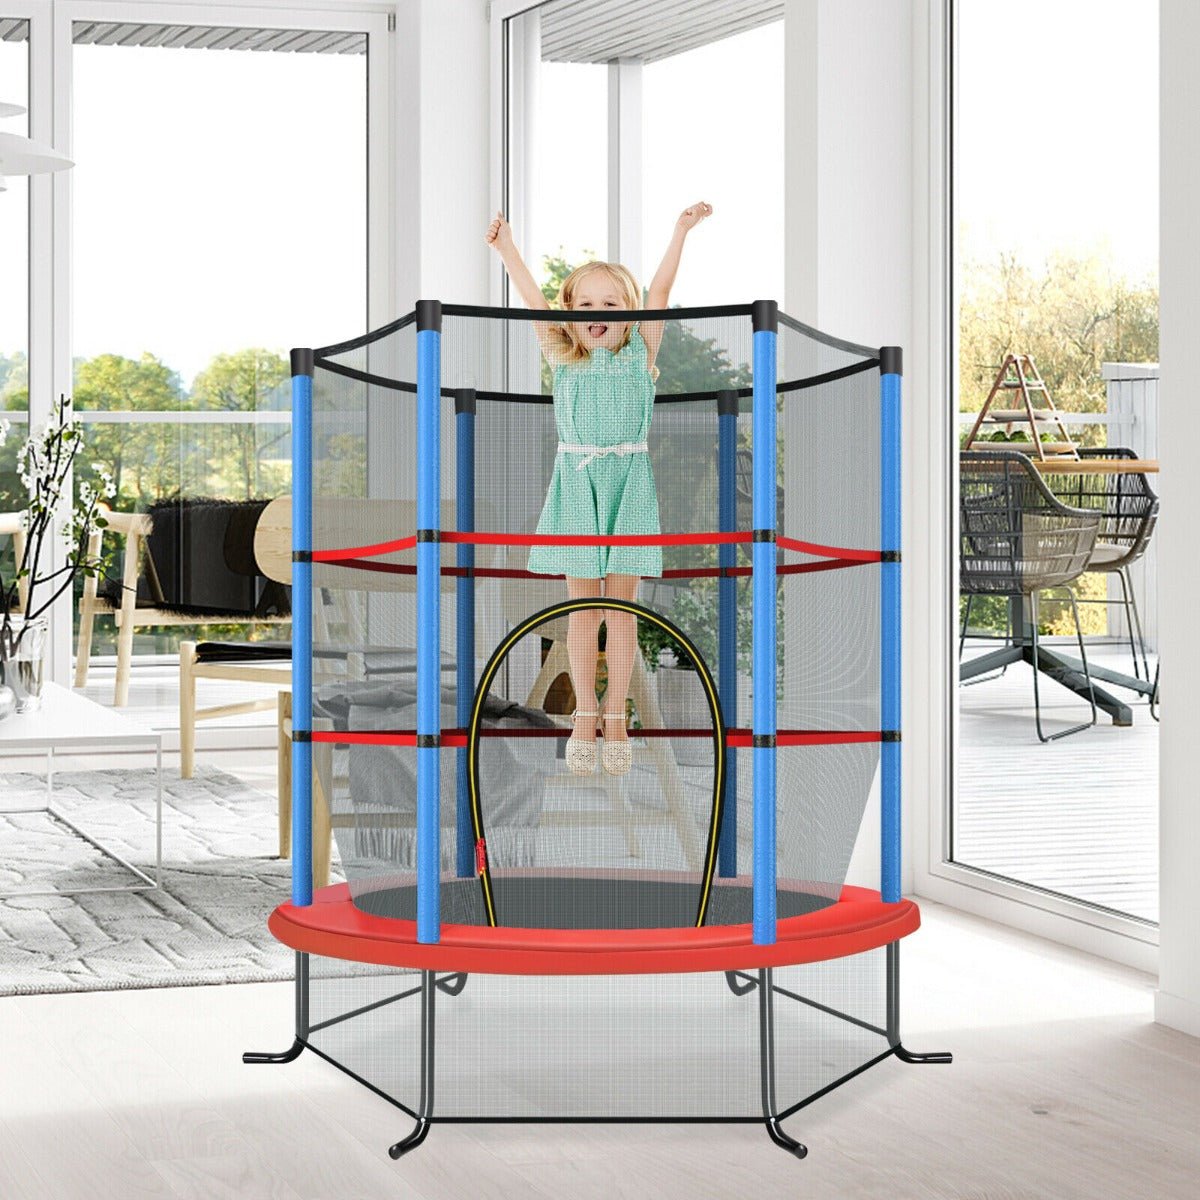 Bounce to Joy: Blue Mini Trampoline with Enclosure Net for Playtime